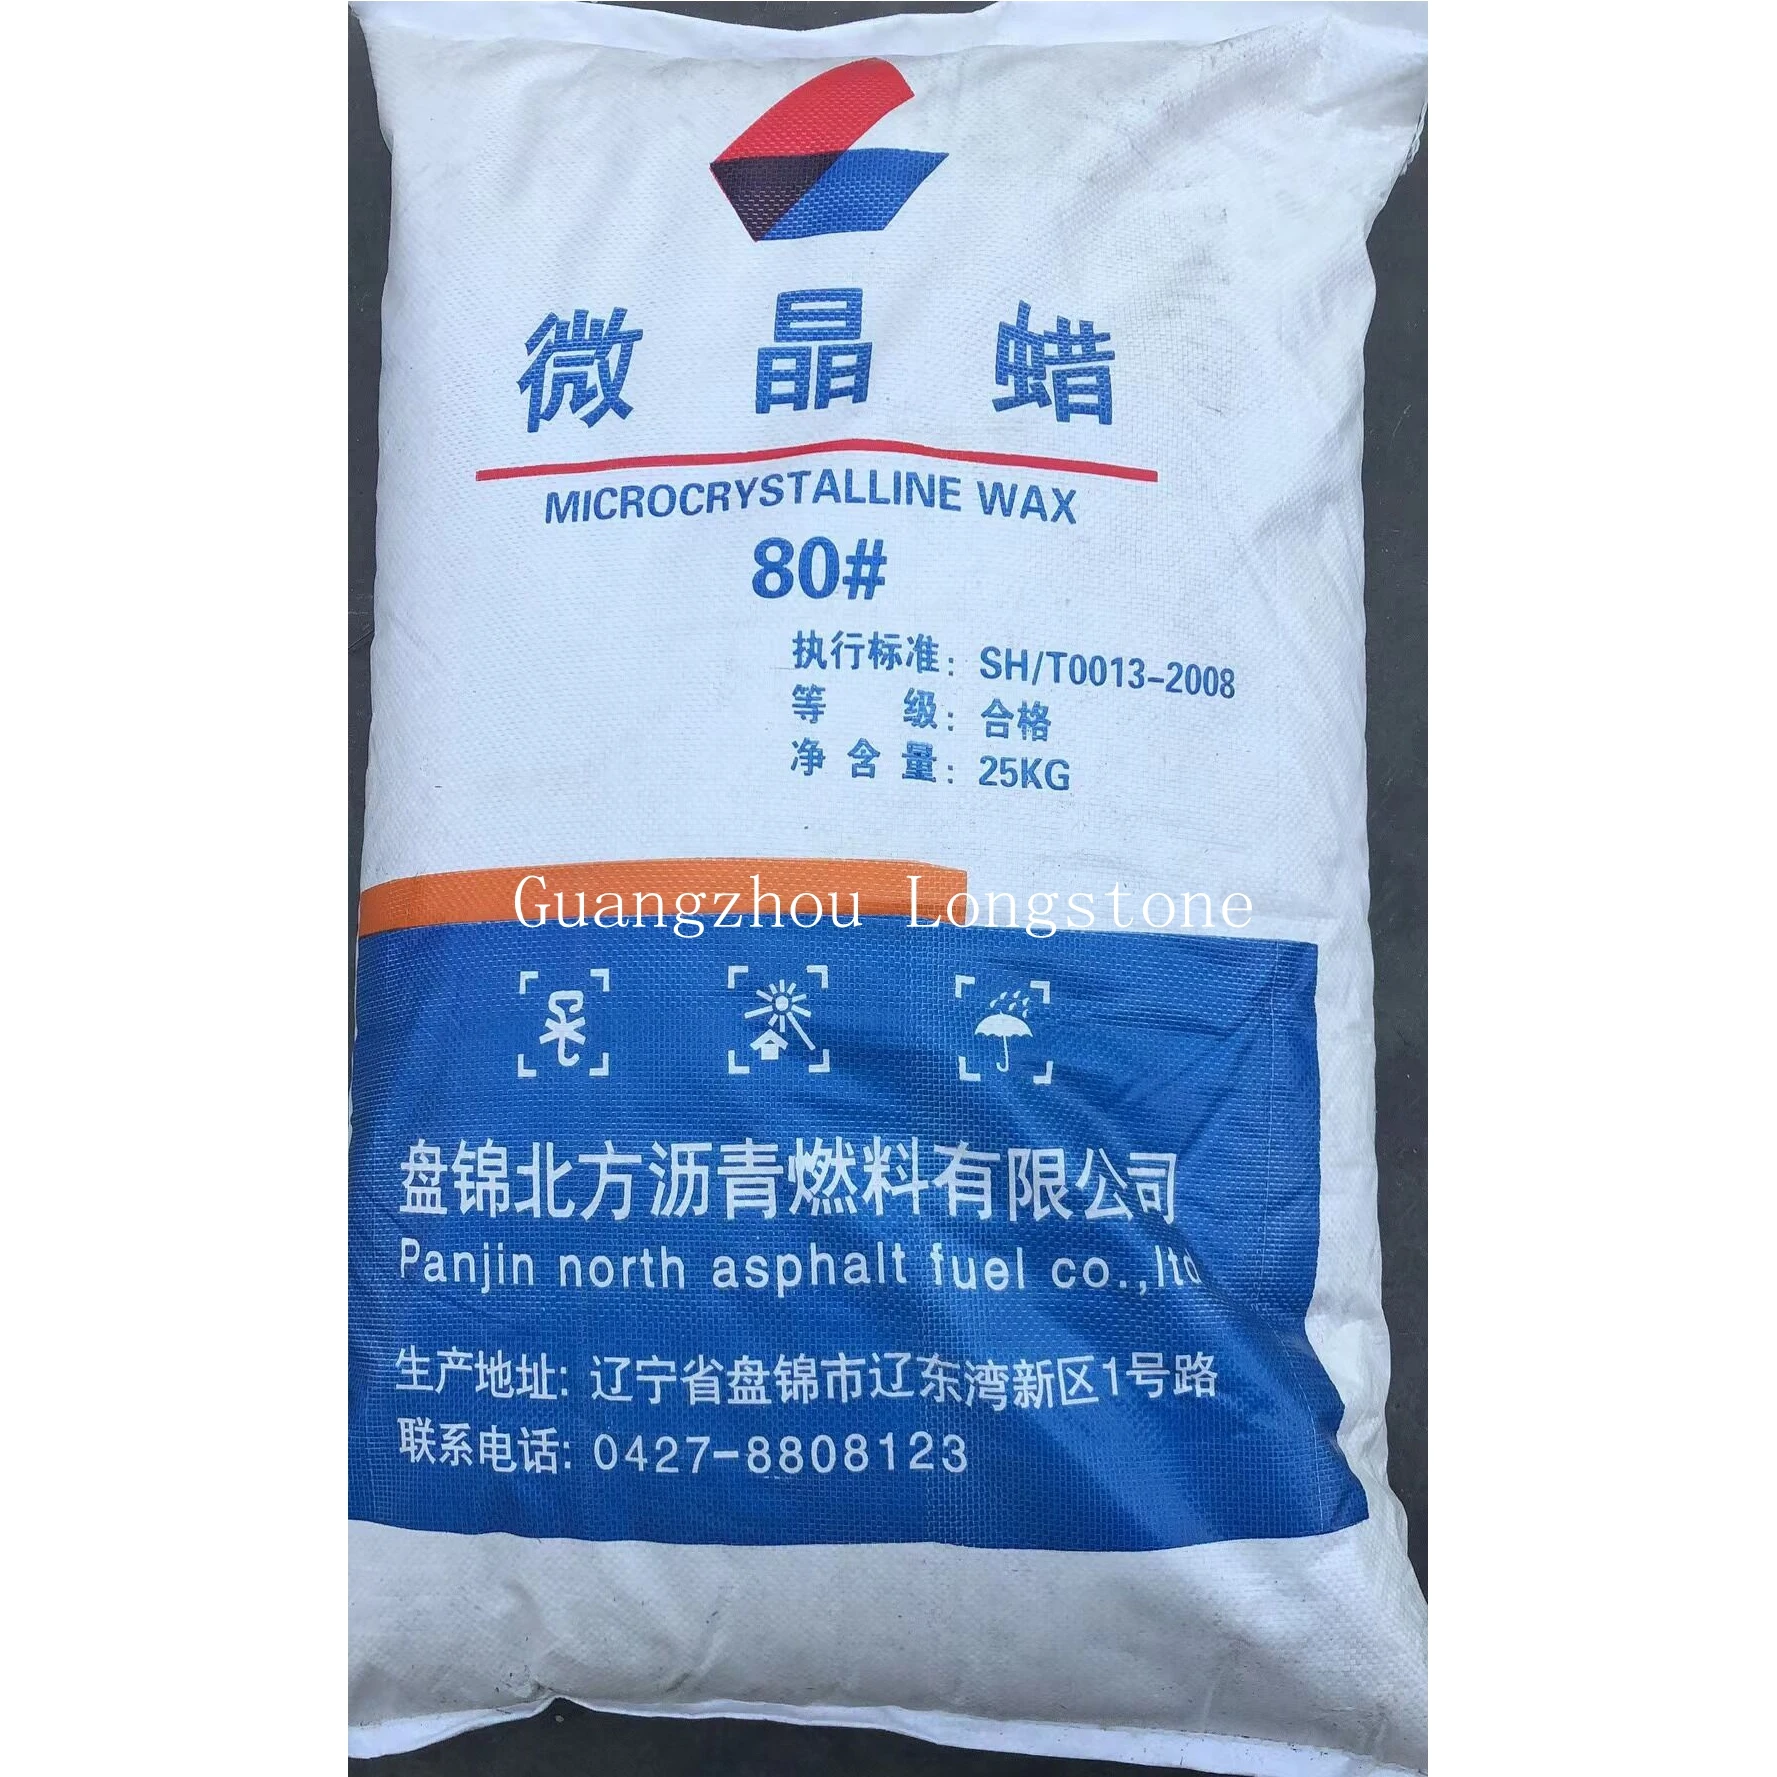 microcrystalline wax-SHANDONG LIANGZHUO NEW MATERIAL TECHNOLOGY CO